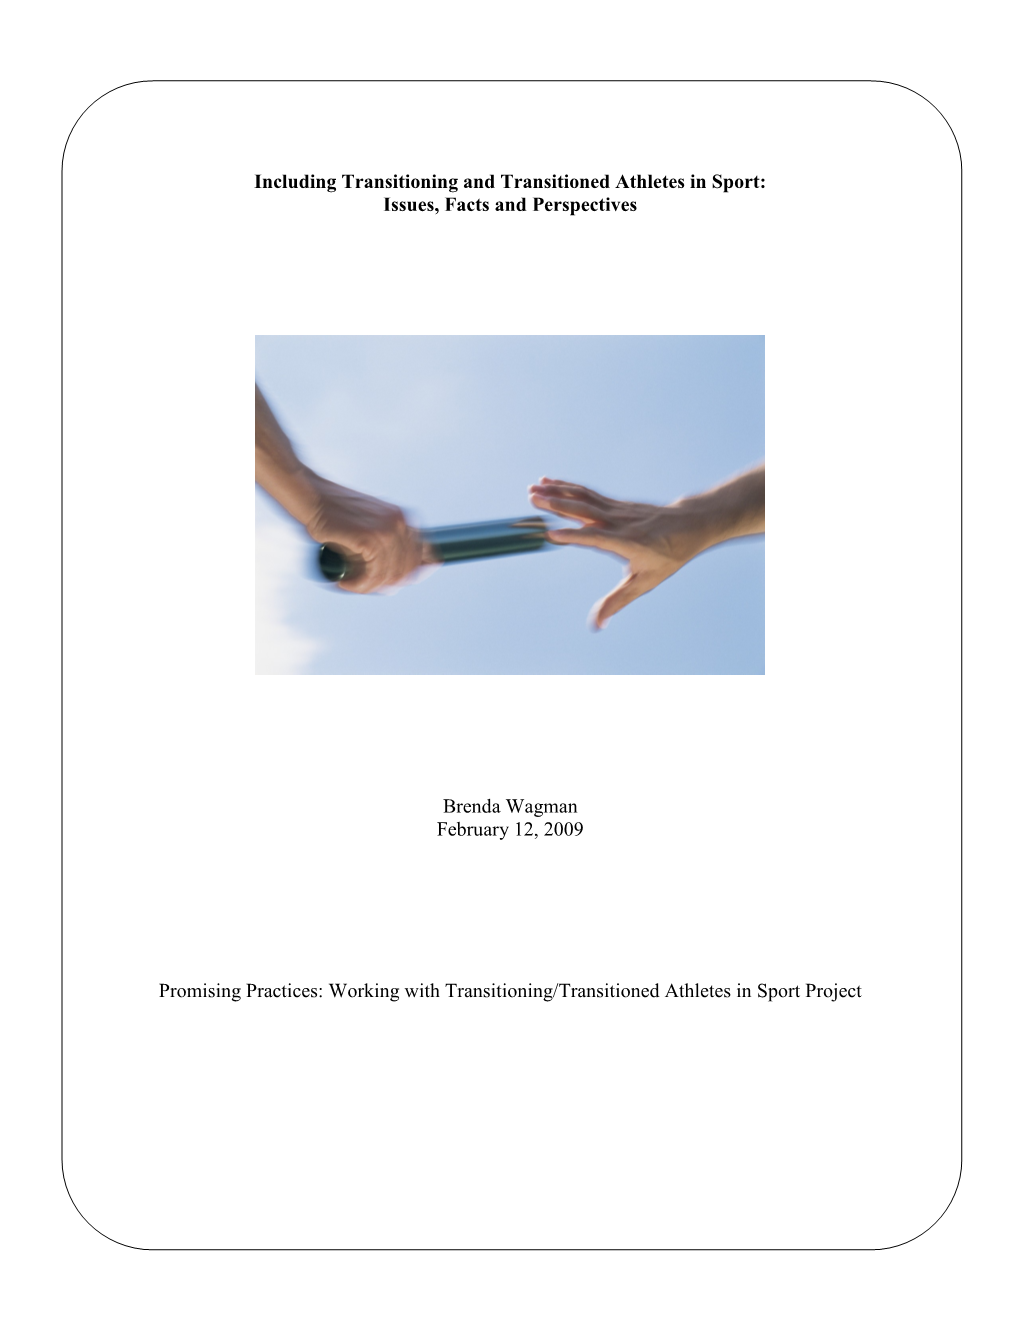 Including Transitioning and Transitioned Athletes in Sport: Issues, Facts and Perspectives